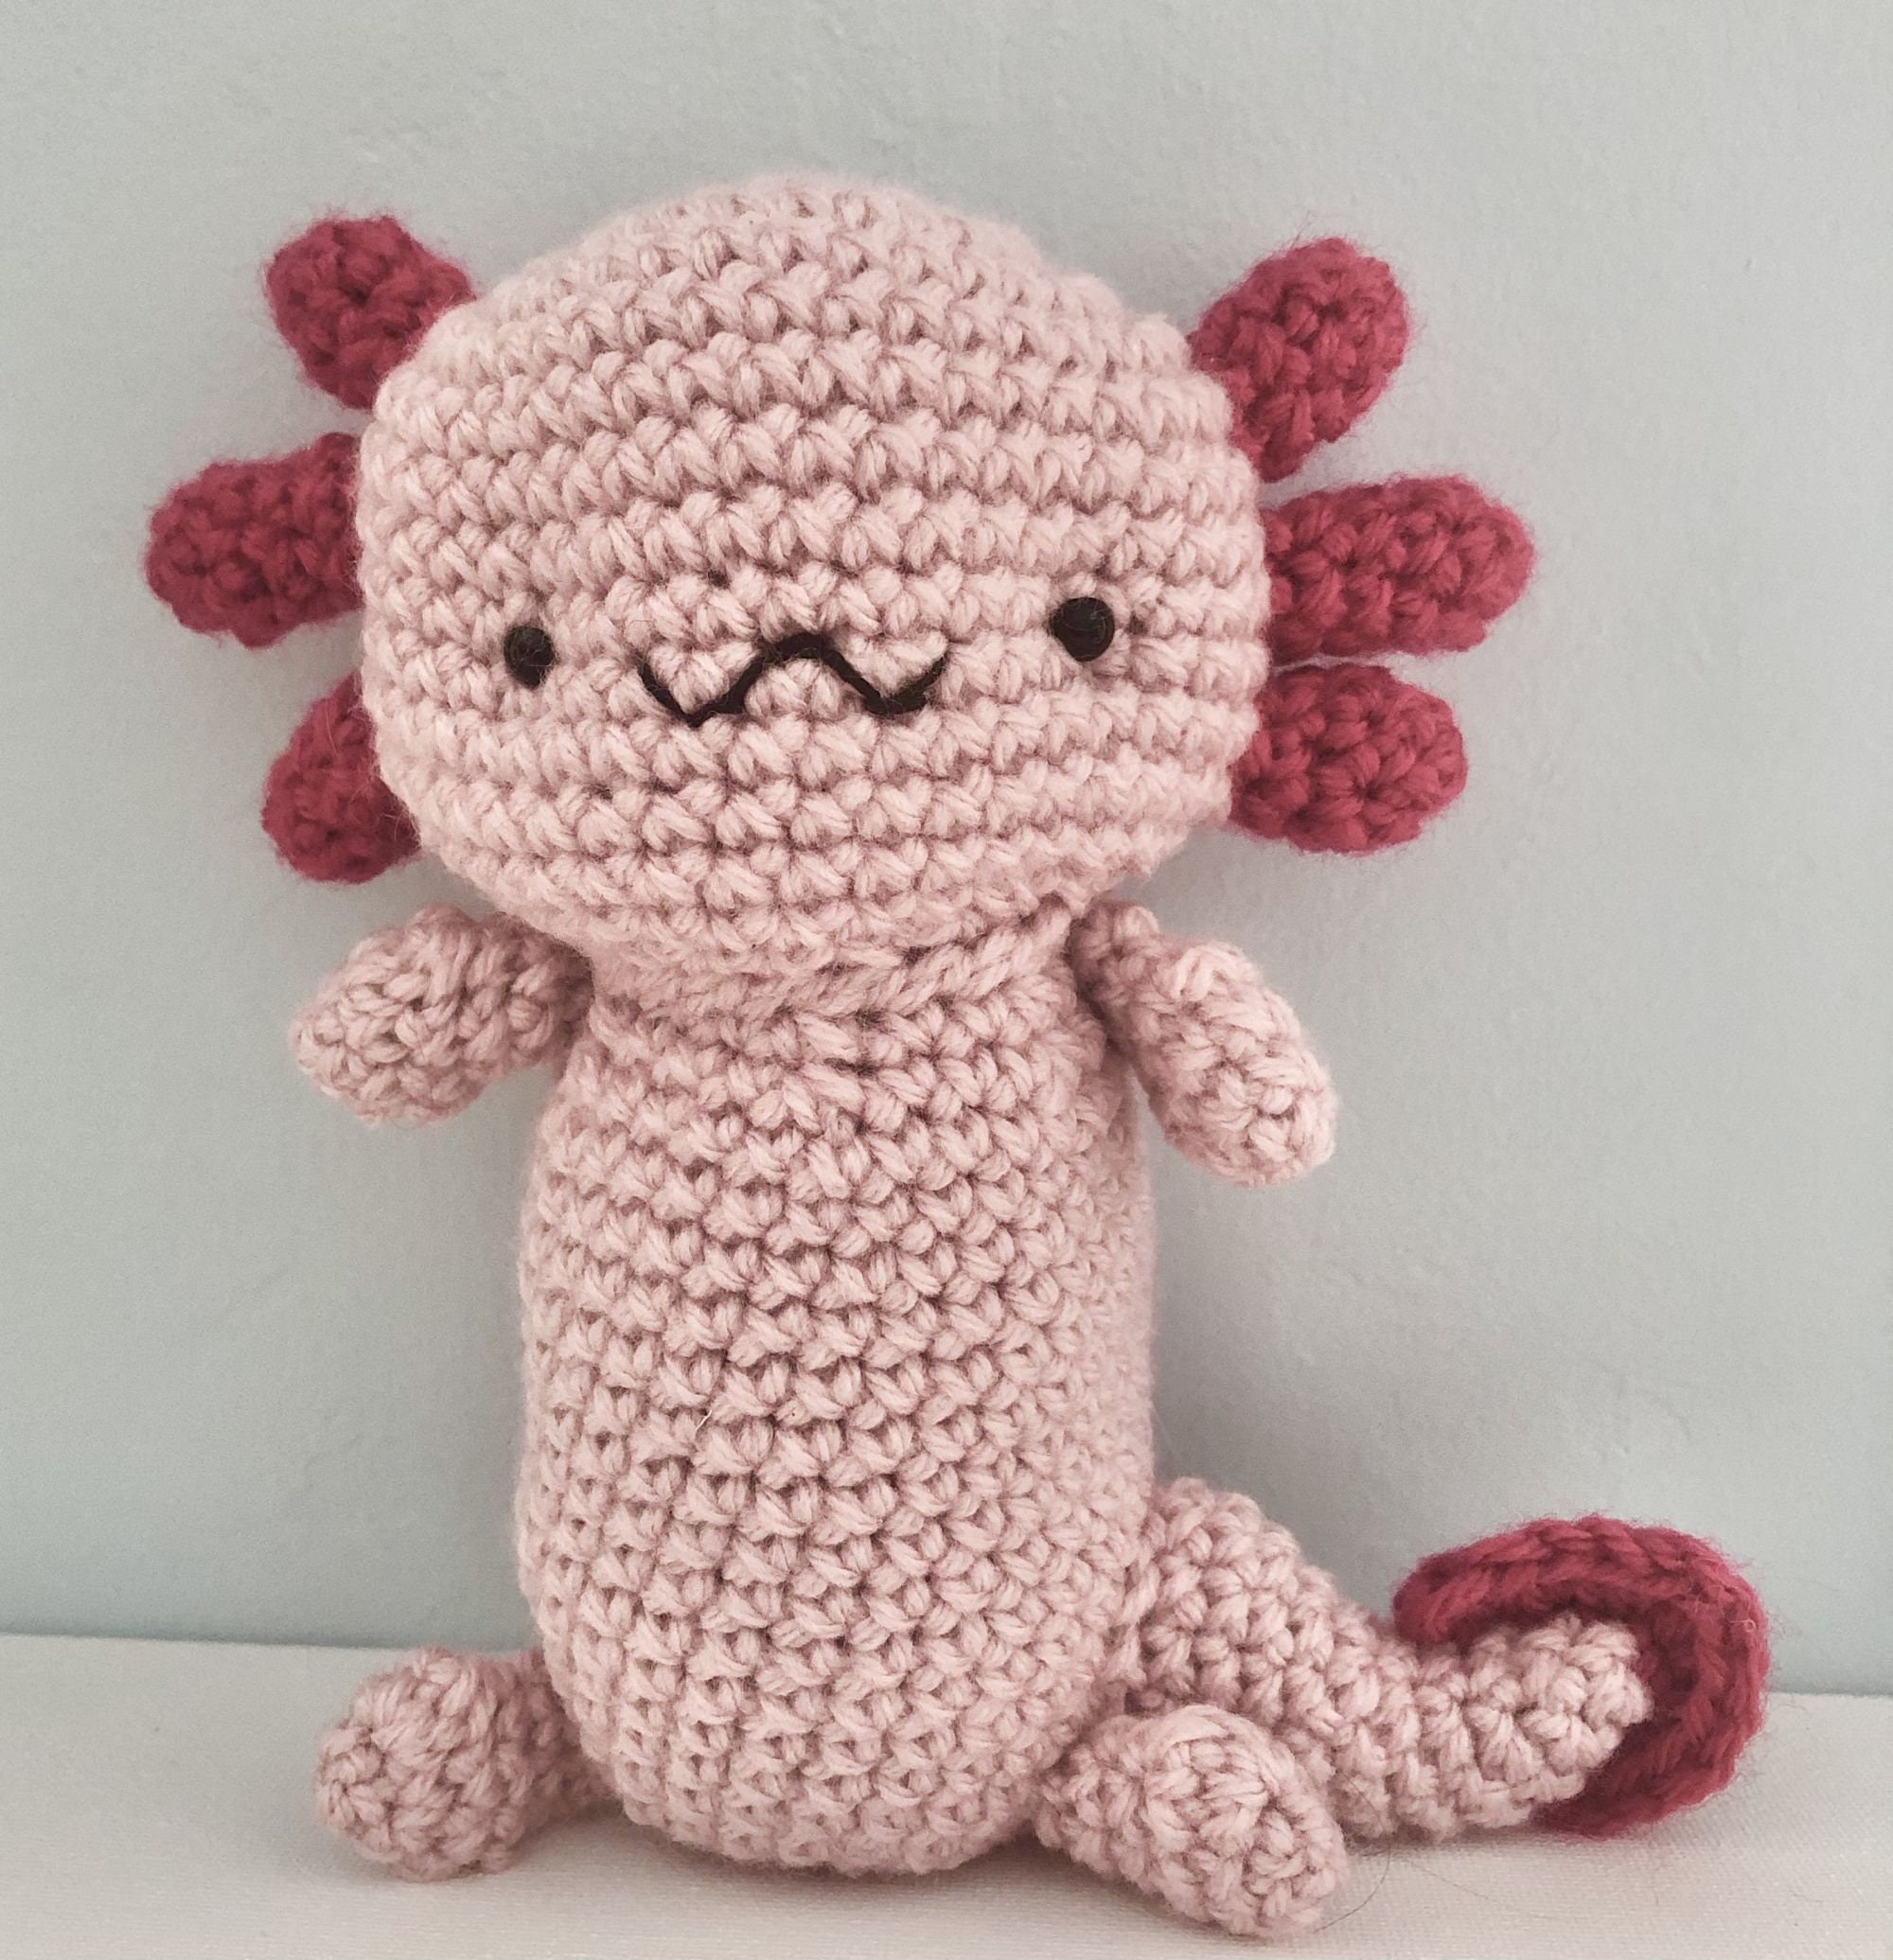 Blick  Santa Monica on Instagram: EXCLUSIVELY @blickartmaterials New Axolotl  Crochet Kit!! Get yours today before they're all gone. #blickartsupplies  #blickart #blickartstores #crochet #crocheting #exclusive